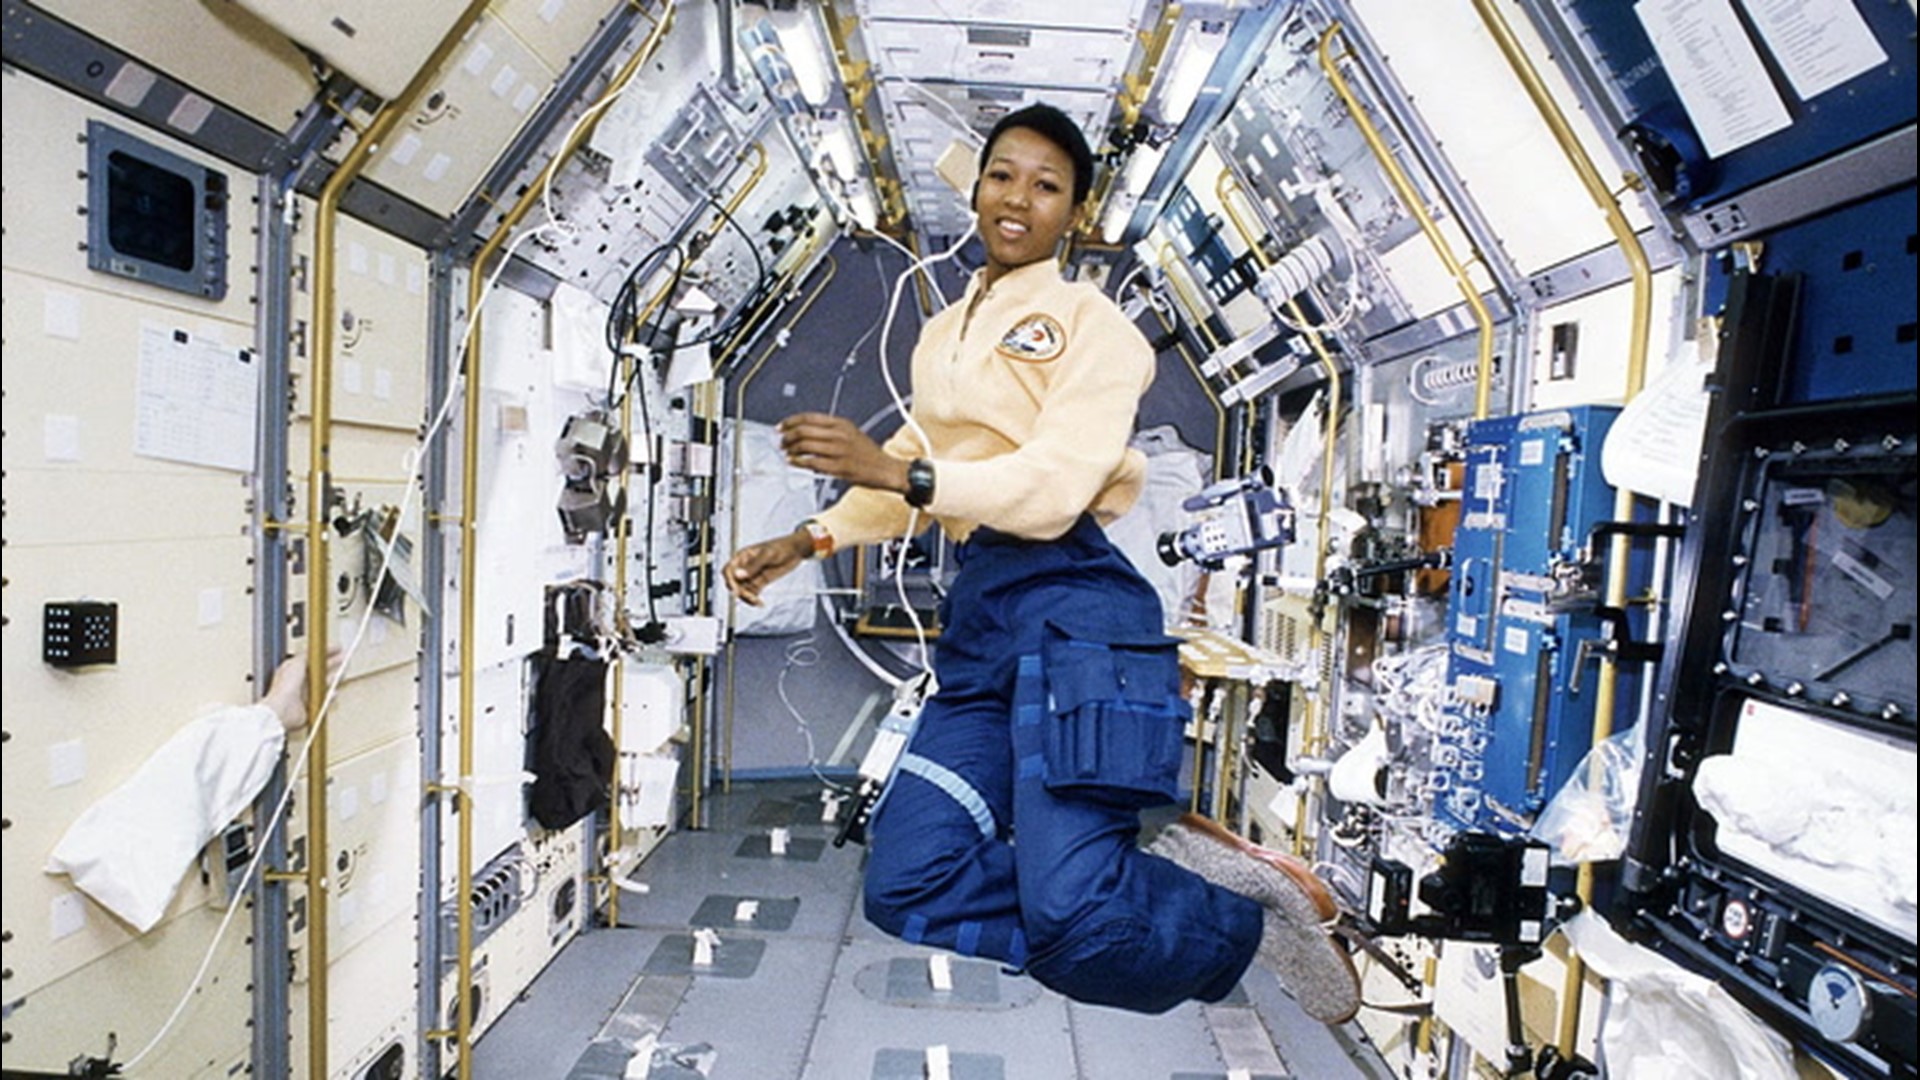 During Black History Month, AccuWeather takes a look at the incredible contributions black women provided to the success of NASA throughout the years.